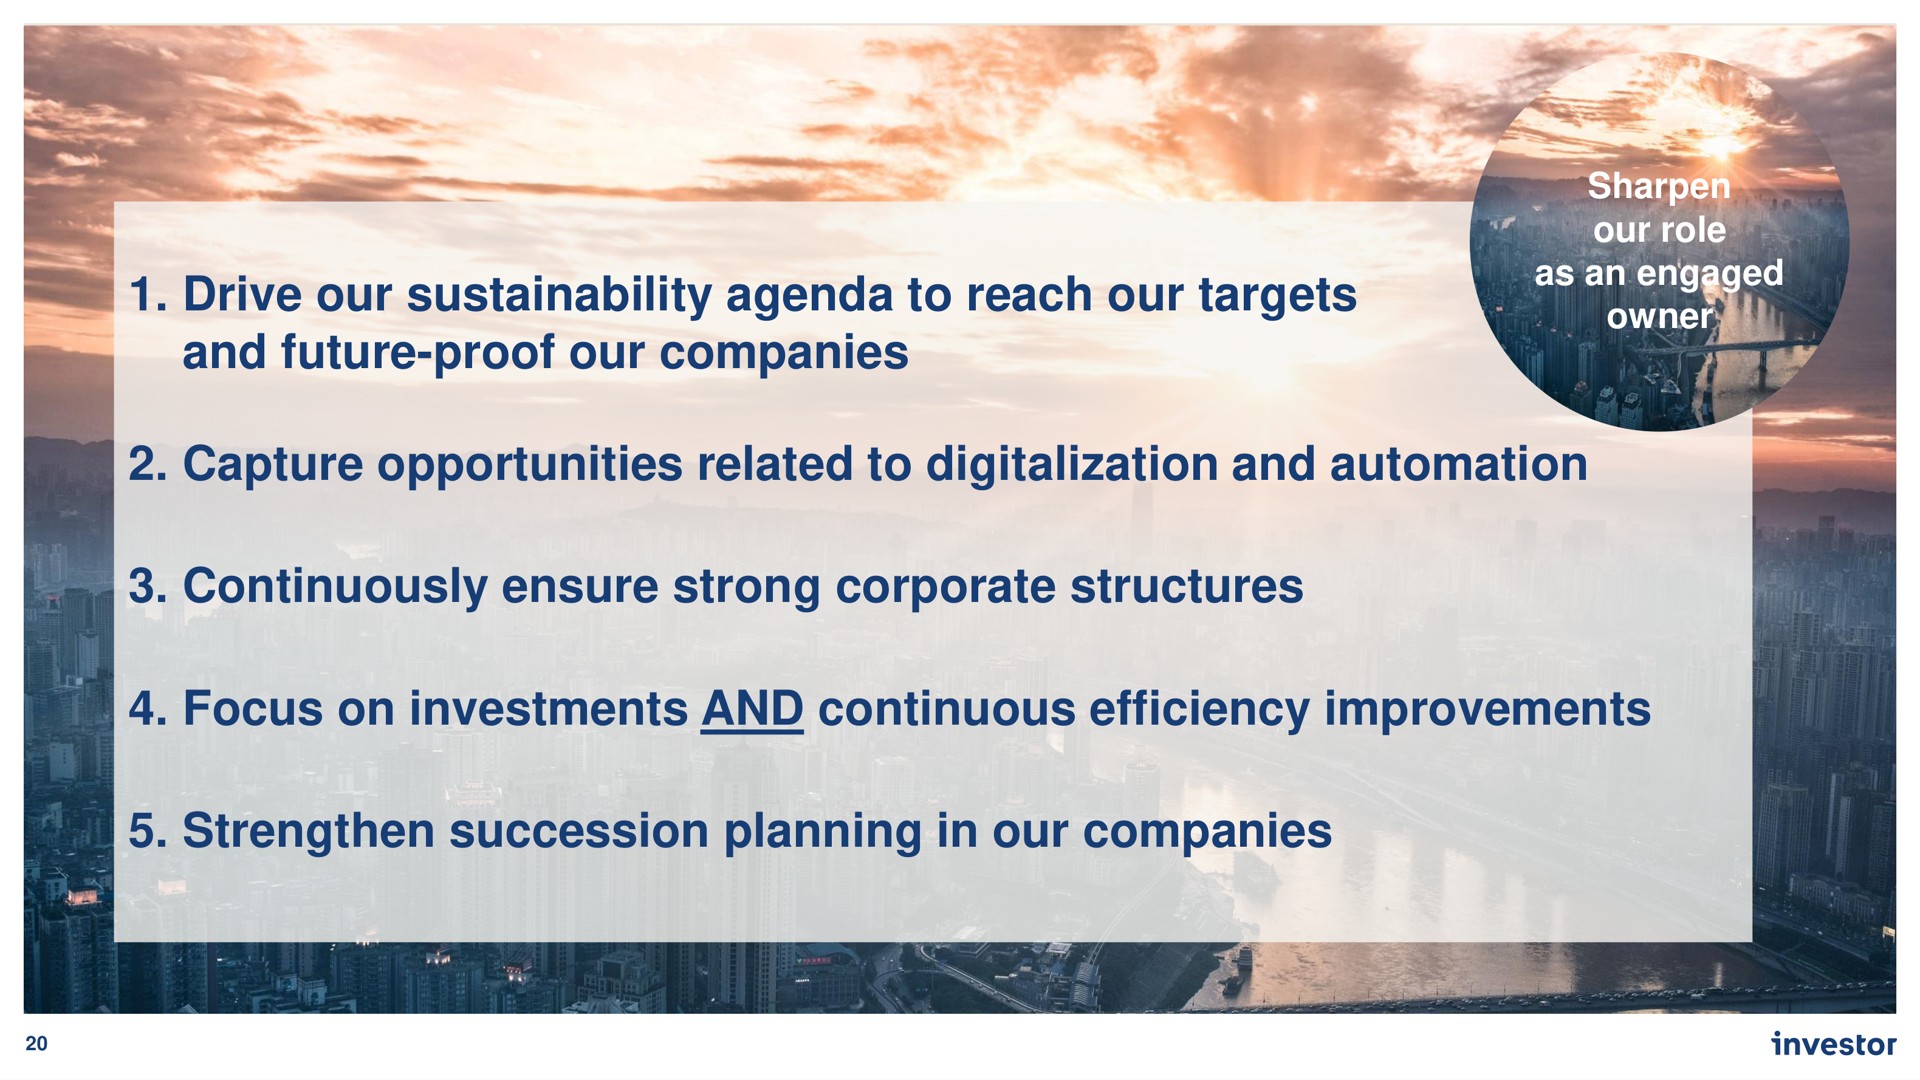 drive our agenda to reach our targets and future proof our companies capture opportunities related to digitalization and continuously ensure strong corporate structures focus on investments and continuous efficiency improvements strengthen succession planning in our companies | Investor AB